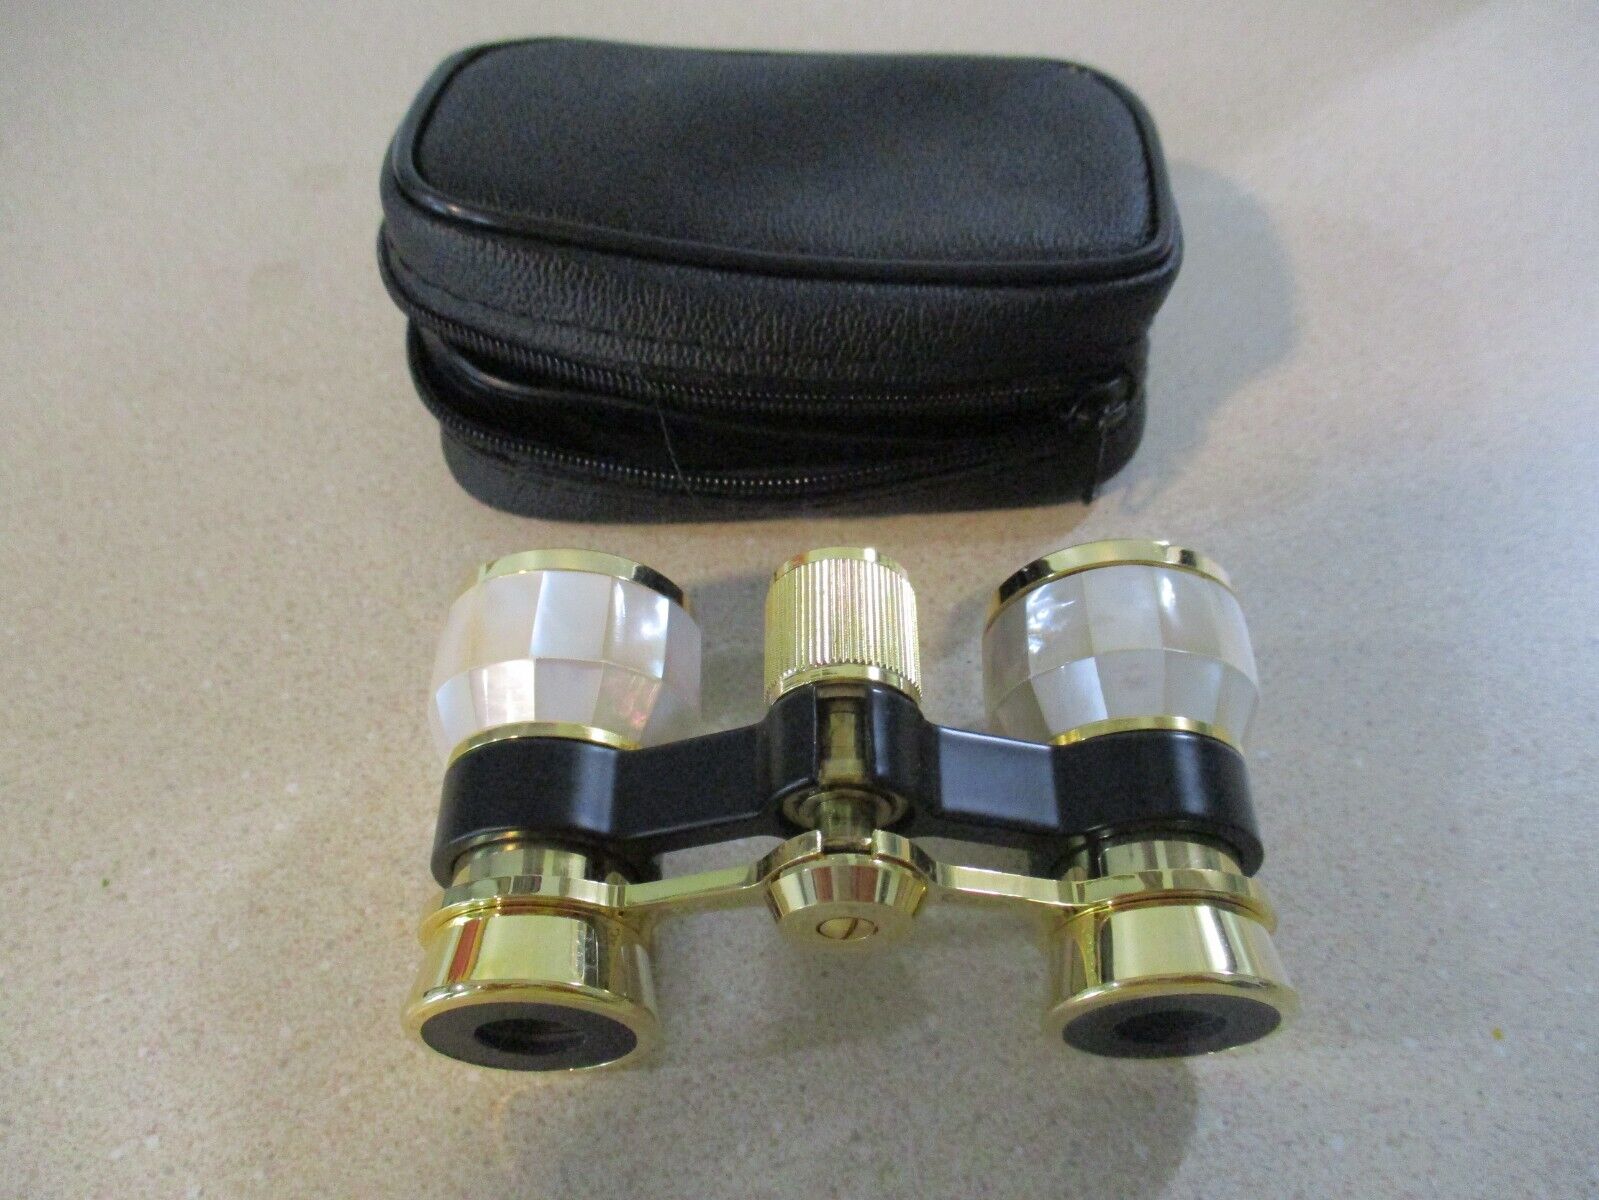 Mother of Pearl Tasco 3x #20-132595 Opera Glasses with case minty